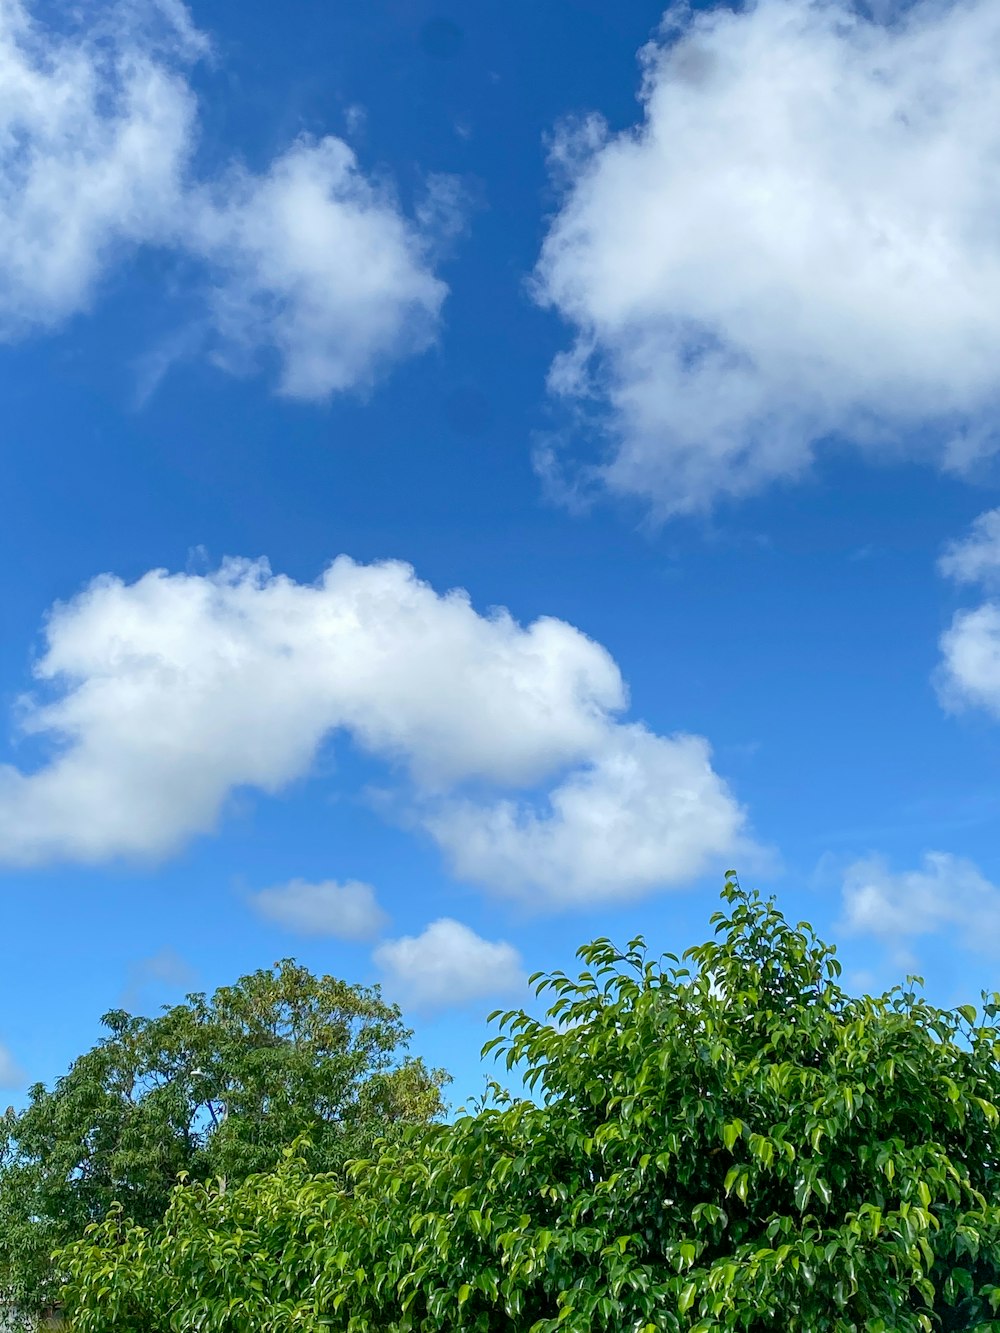 Green trees under blue sky and white clouds during daytime photo ...